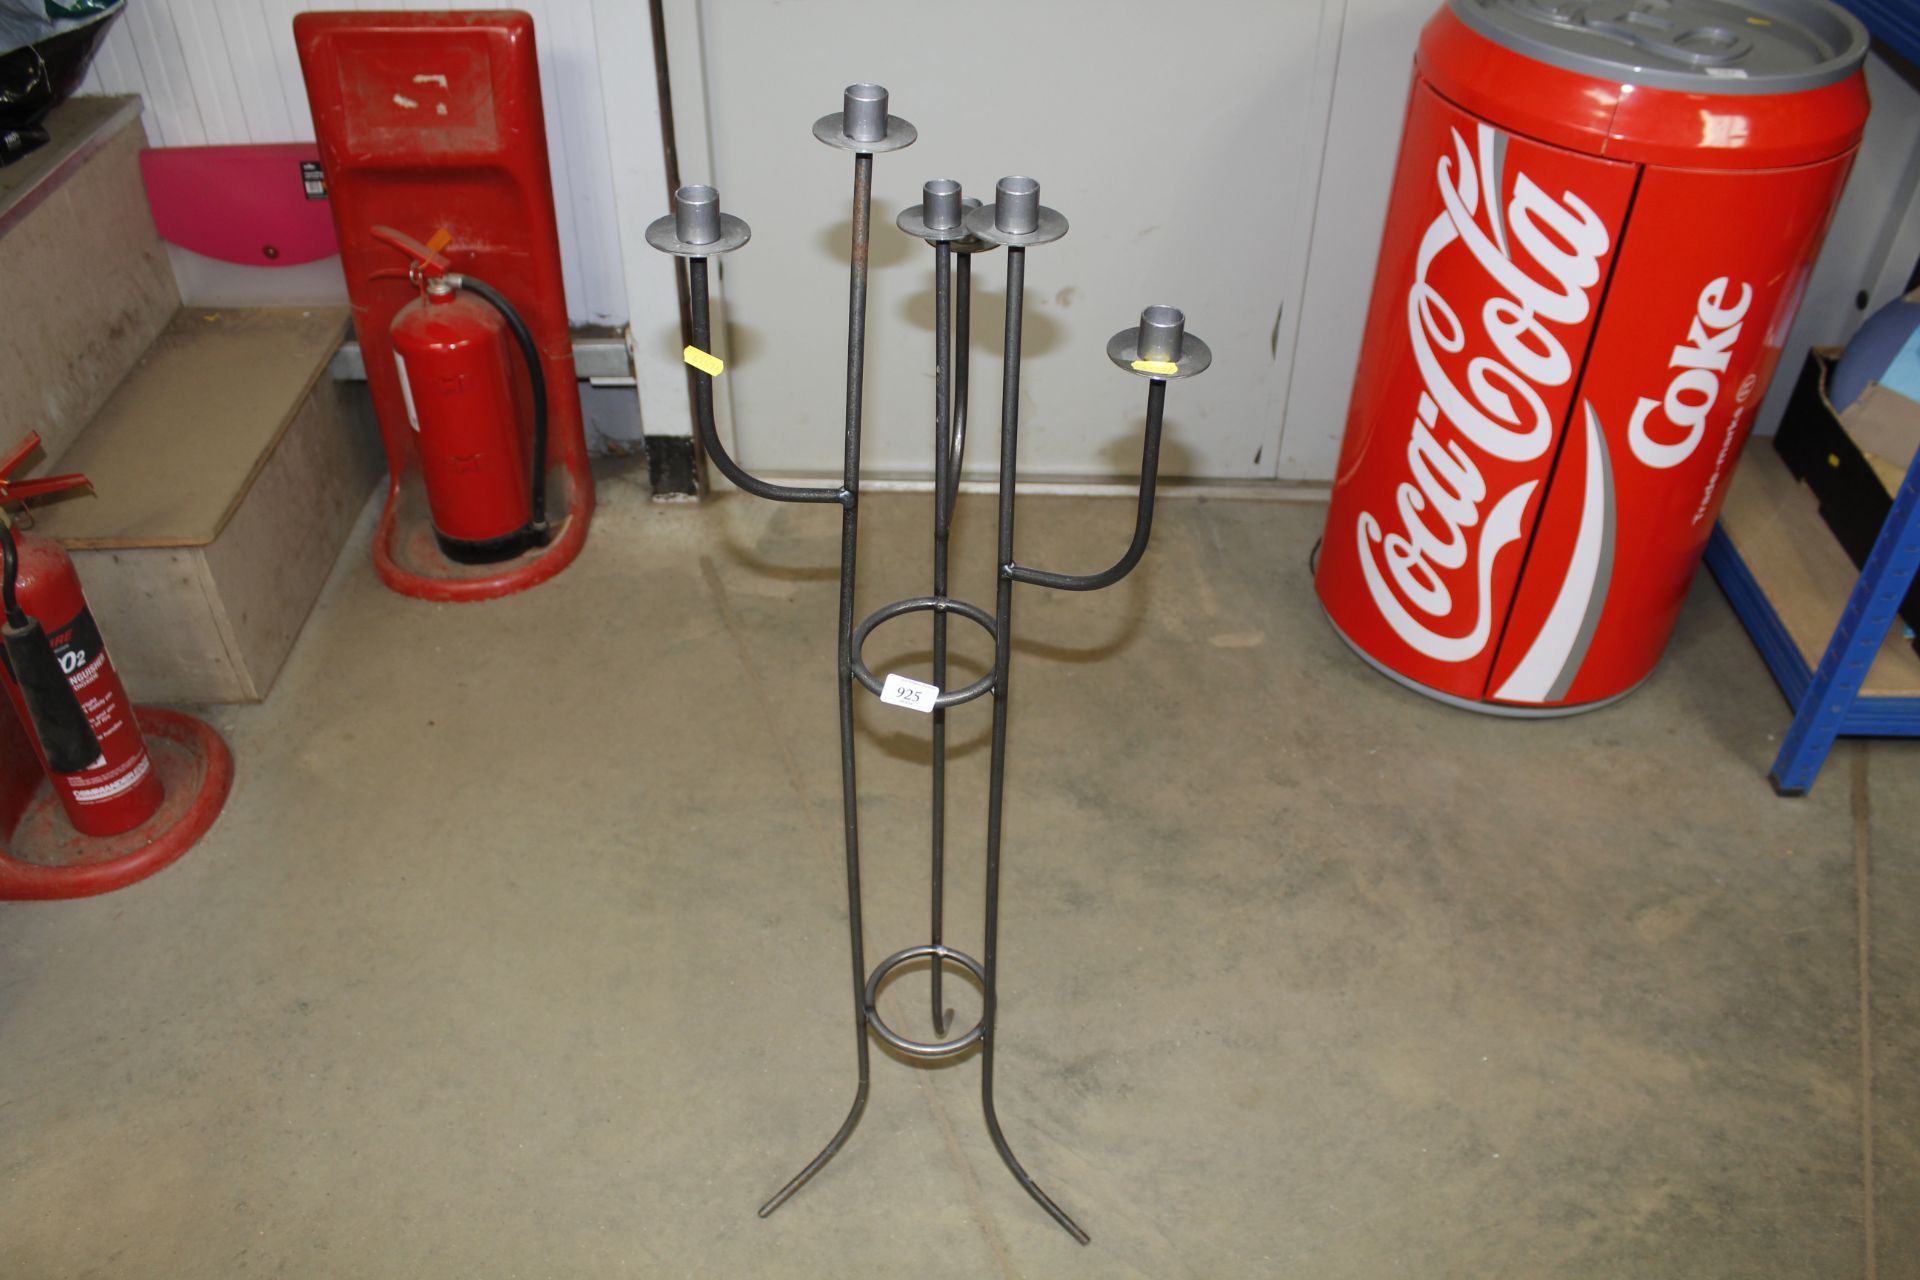 A six branch candle stand